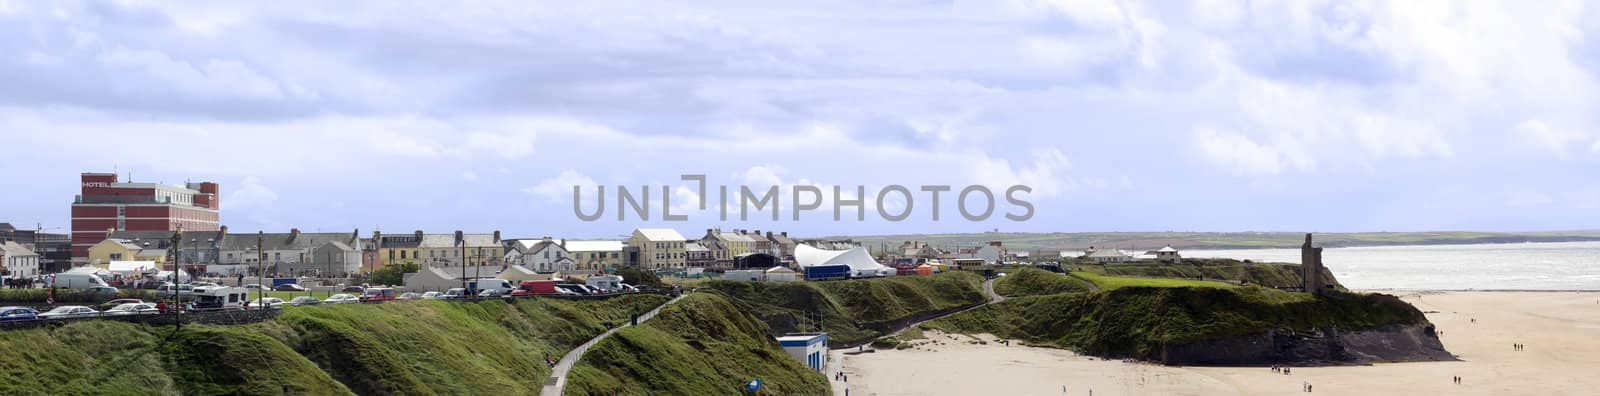 ballybunion in summer with panaramic view of the town and beach